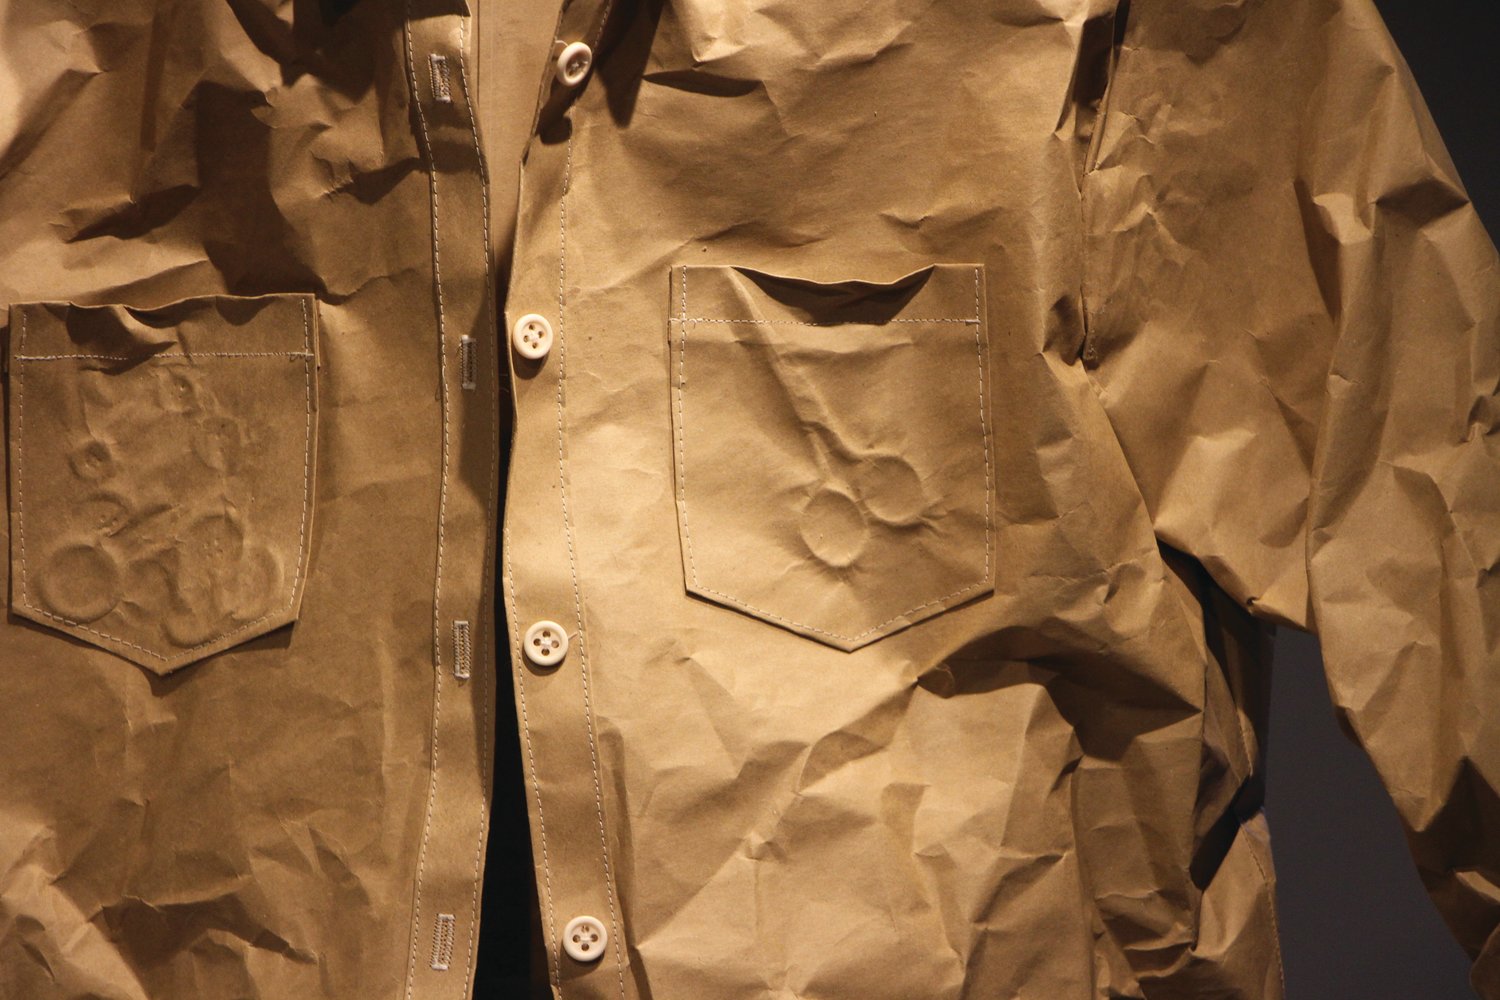 The “Port Townsend Paper” exhibit showcases Rudd’s creation of life-size sewn jeans made of Port Townsend Paper Mill brown kraft paper.